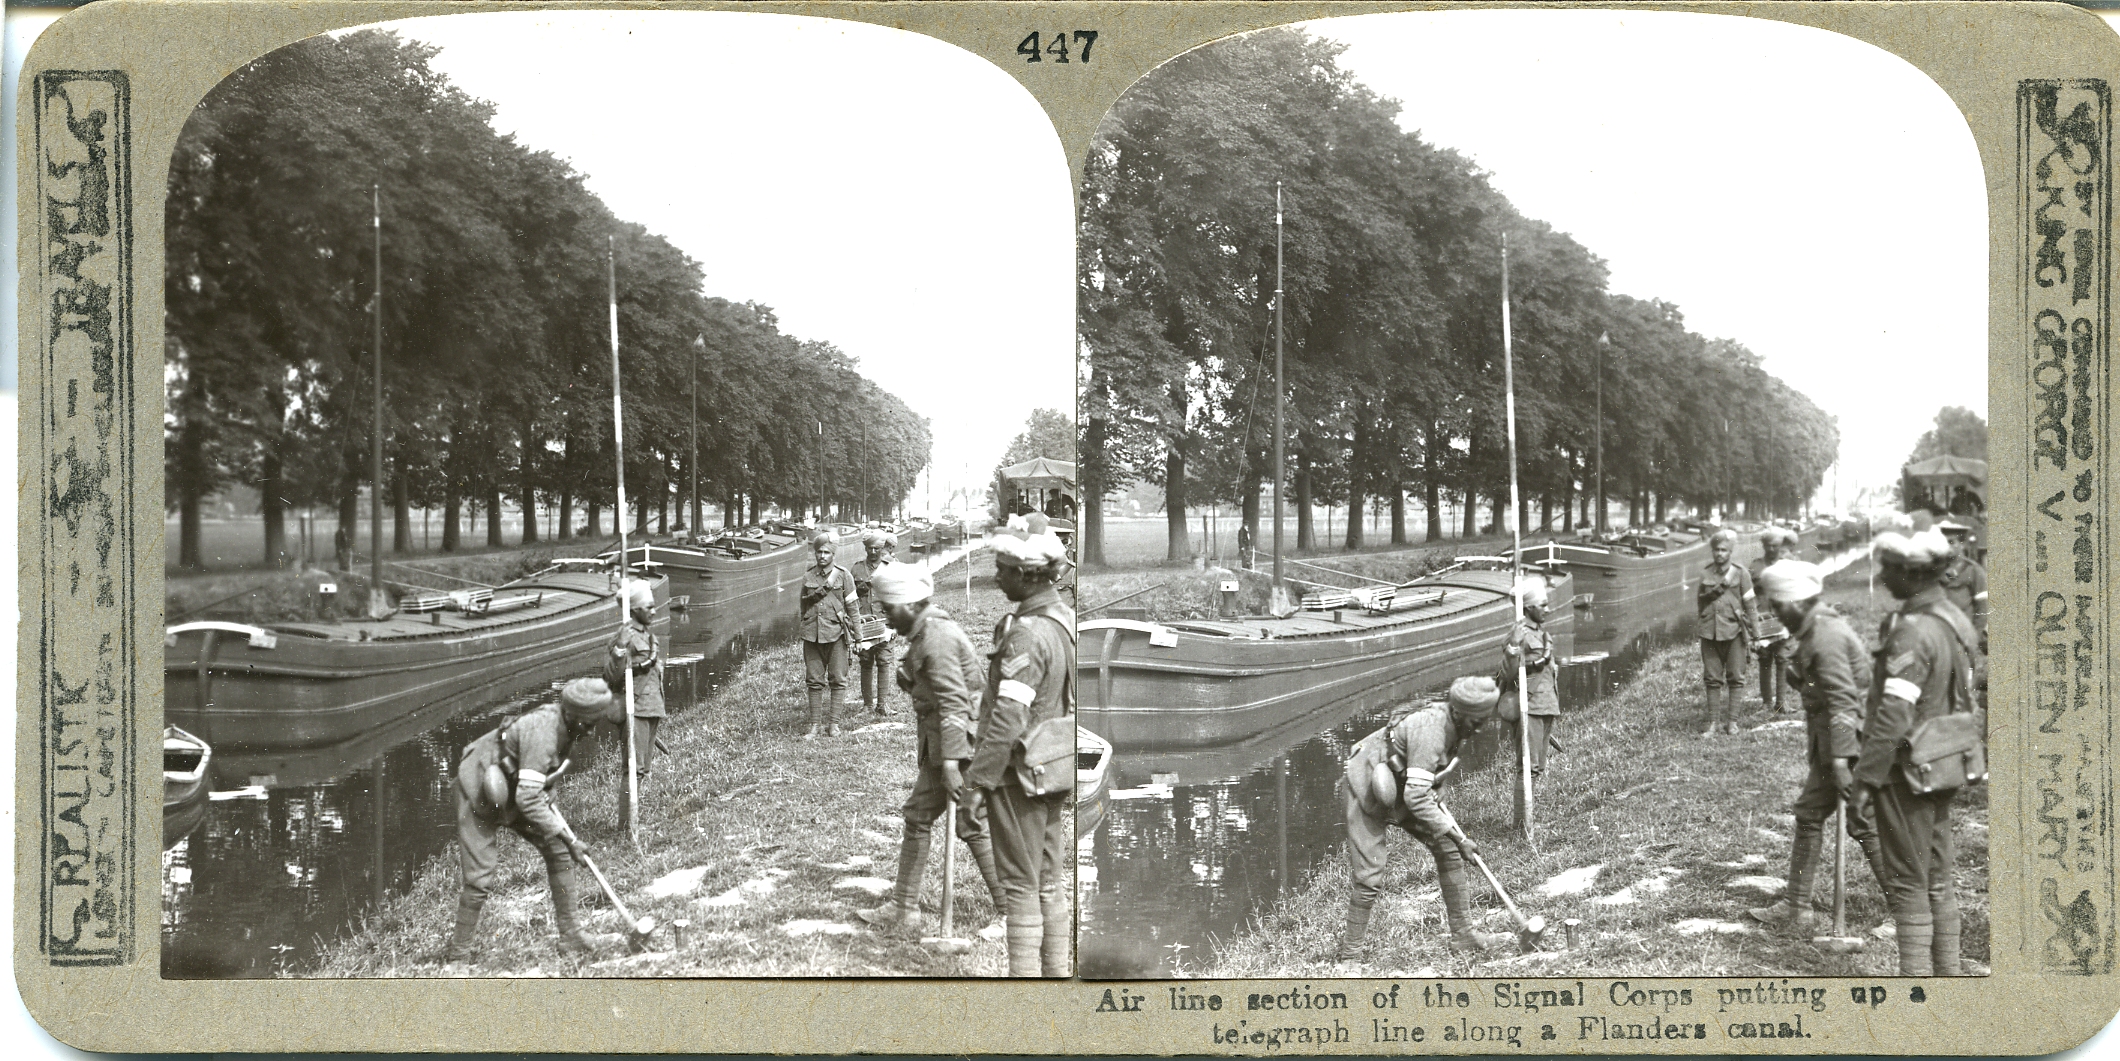 Air line section of the Signal Corps putting up a telegraph line along a Flanders canal